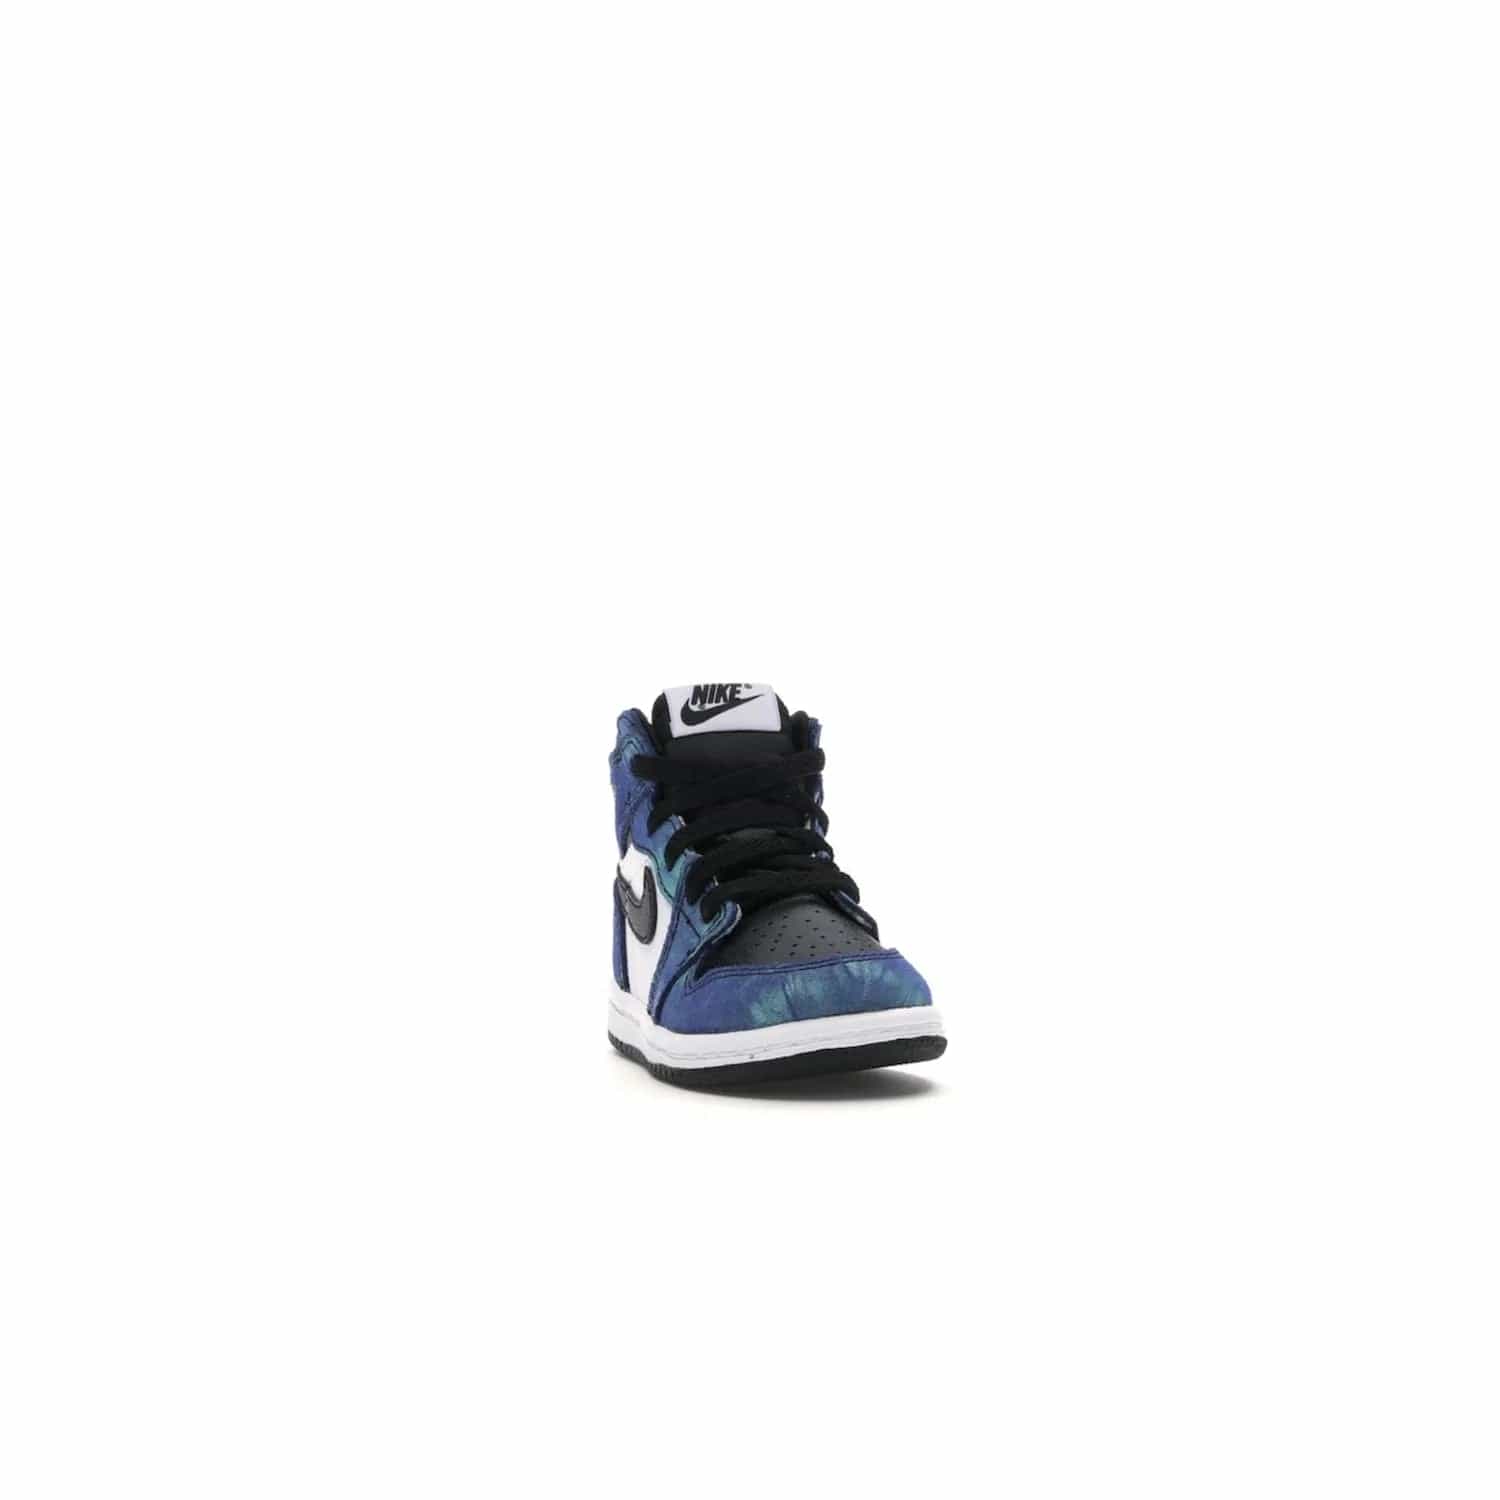 Jordan 1 Retro High Tie Dye (TD) - Image 8 - Only at www.BallersClubKickz.com - Add a unique twist to your sneaker collection with the Jordan 1 Retro High Tie Dye (TD). Classic Air Jordan 1 details like toe box perforations and the signature Swoosh logo on the sidewall are topped with an eye-catching tie dye design that’s perfect for styling all year round.